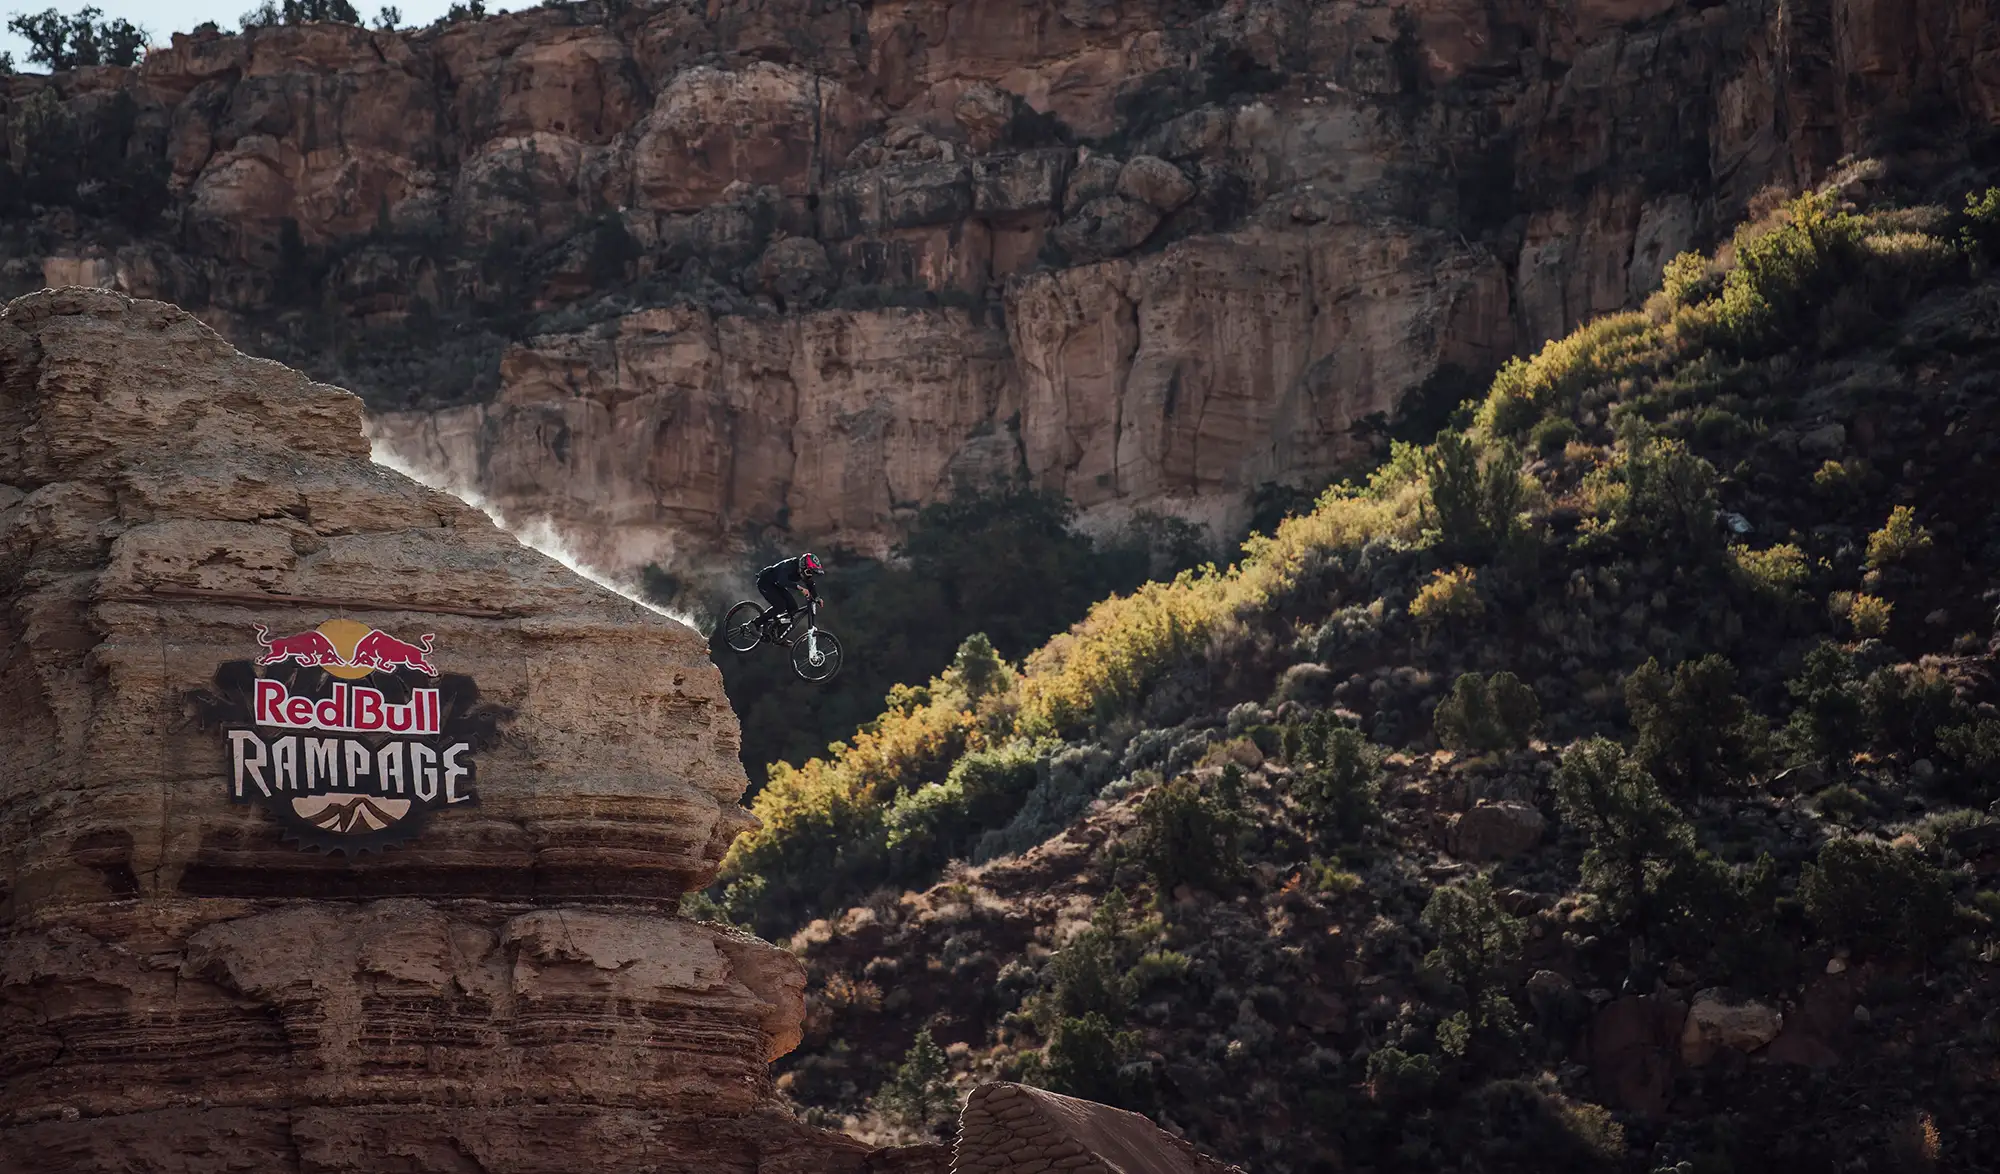 Reed Boggs Red Bull Rampage